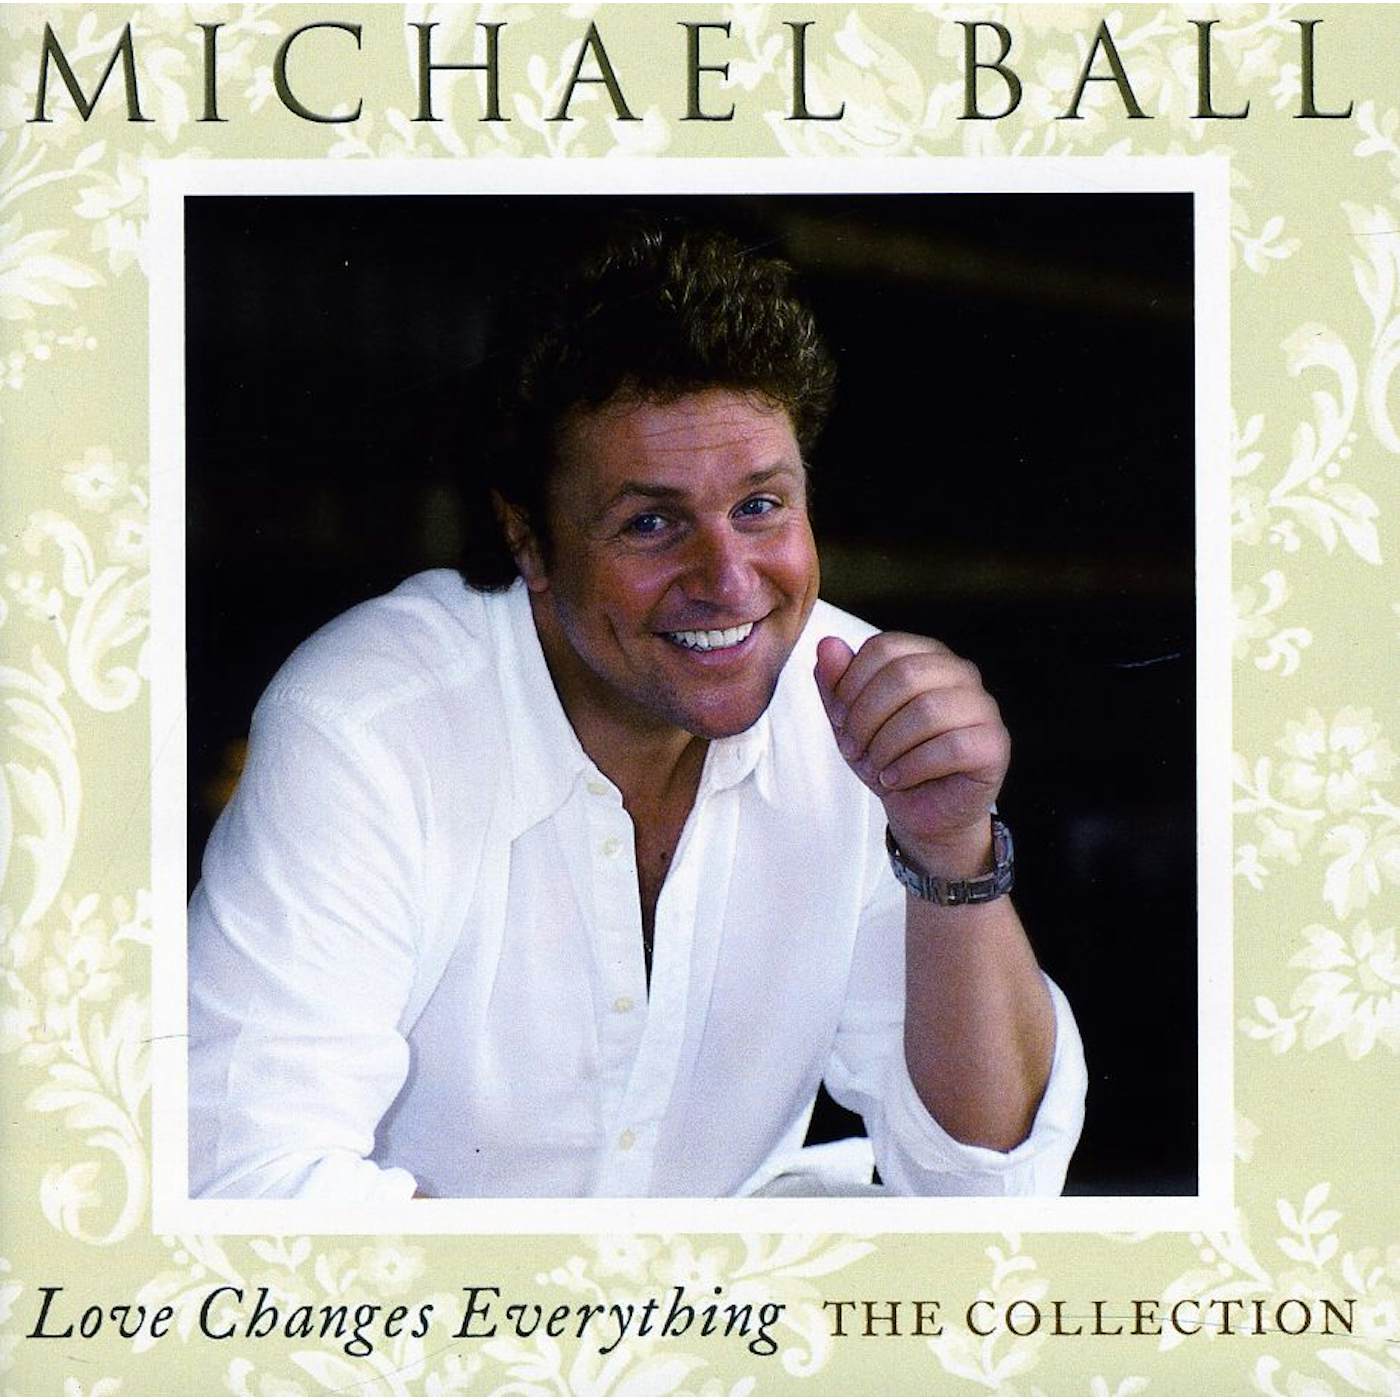 Michael Ball LOVE CHANGES EVERYTHING: COLLECTION CD